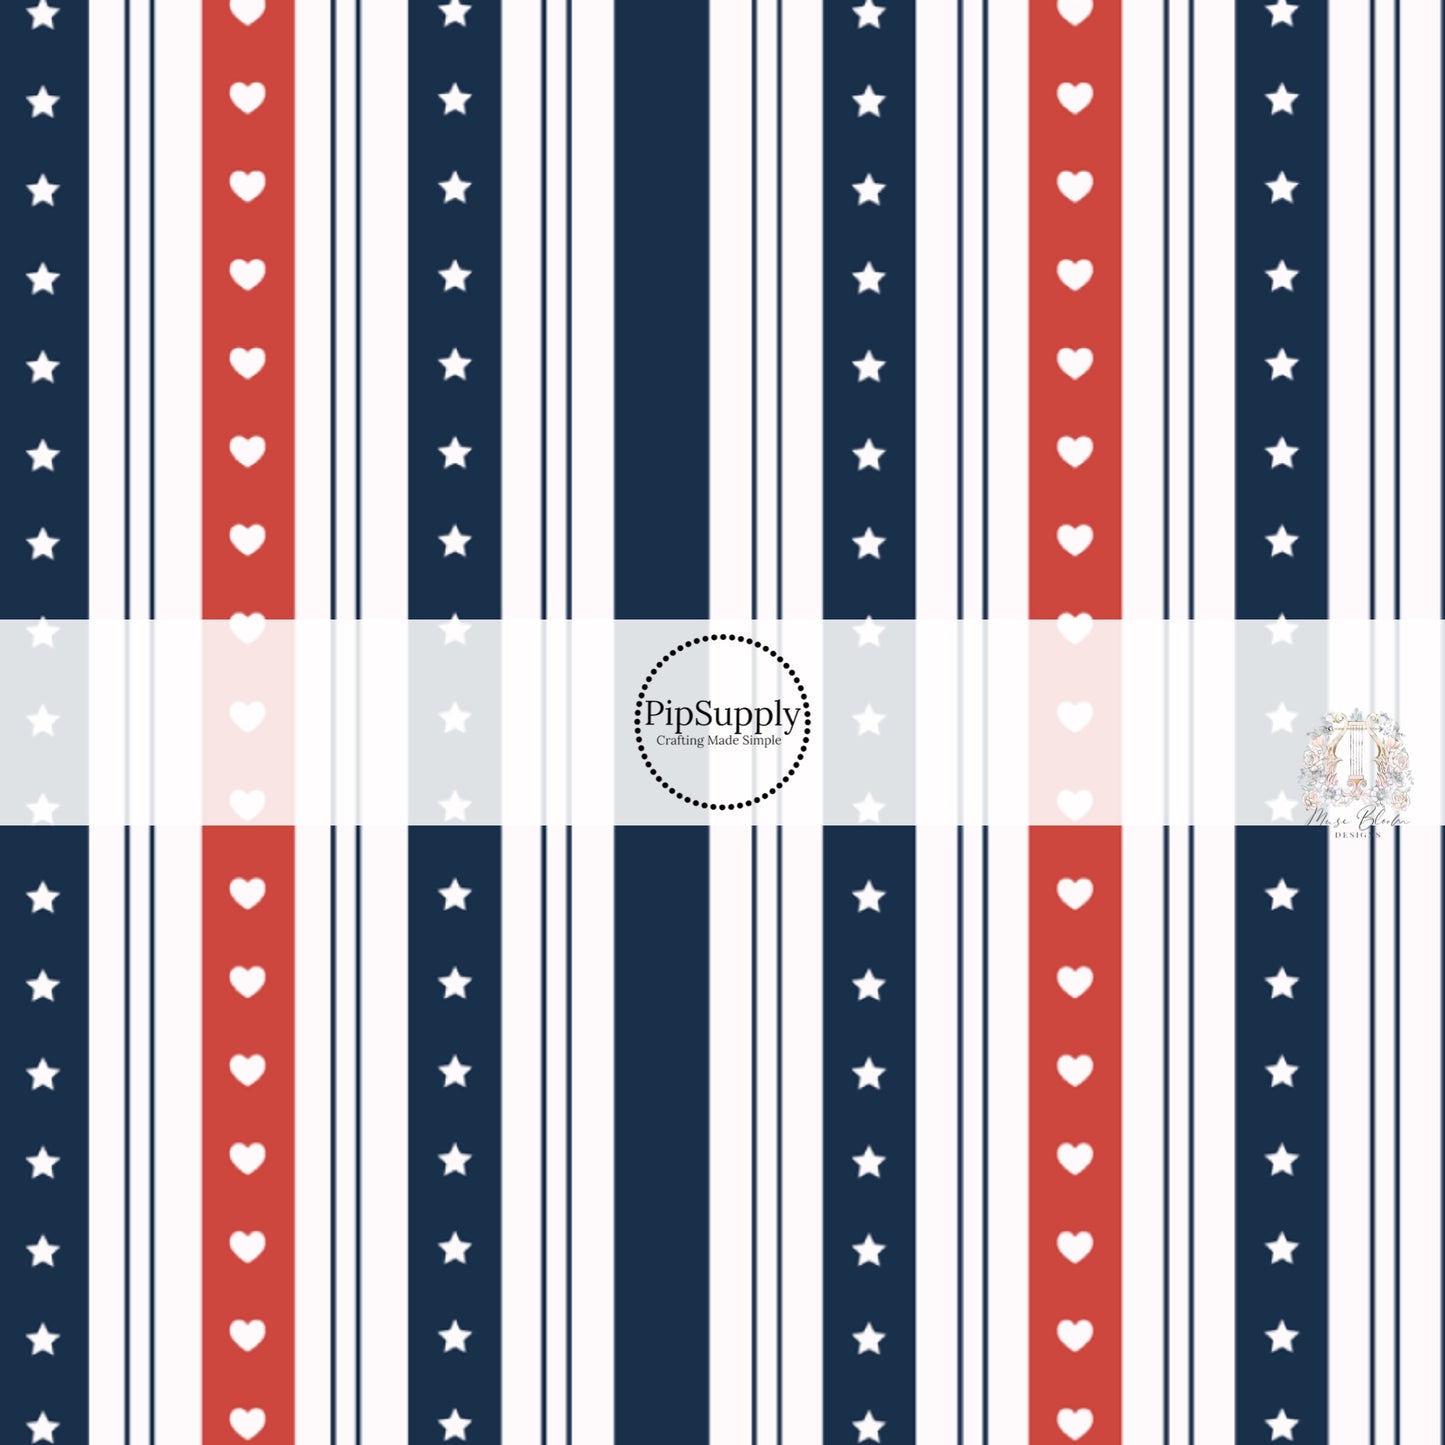 Hearts and stars on red and blue stripes with white stripe bow strips